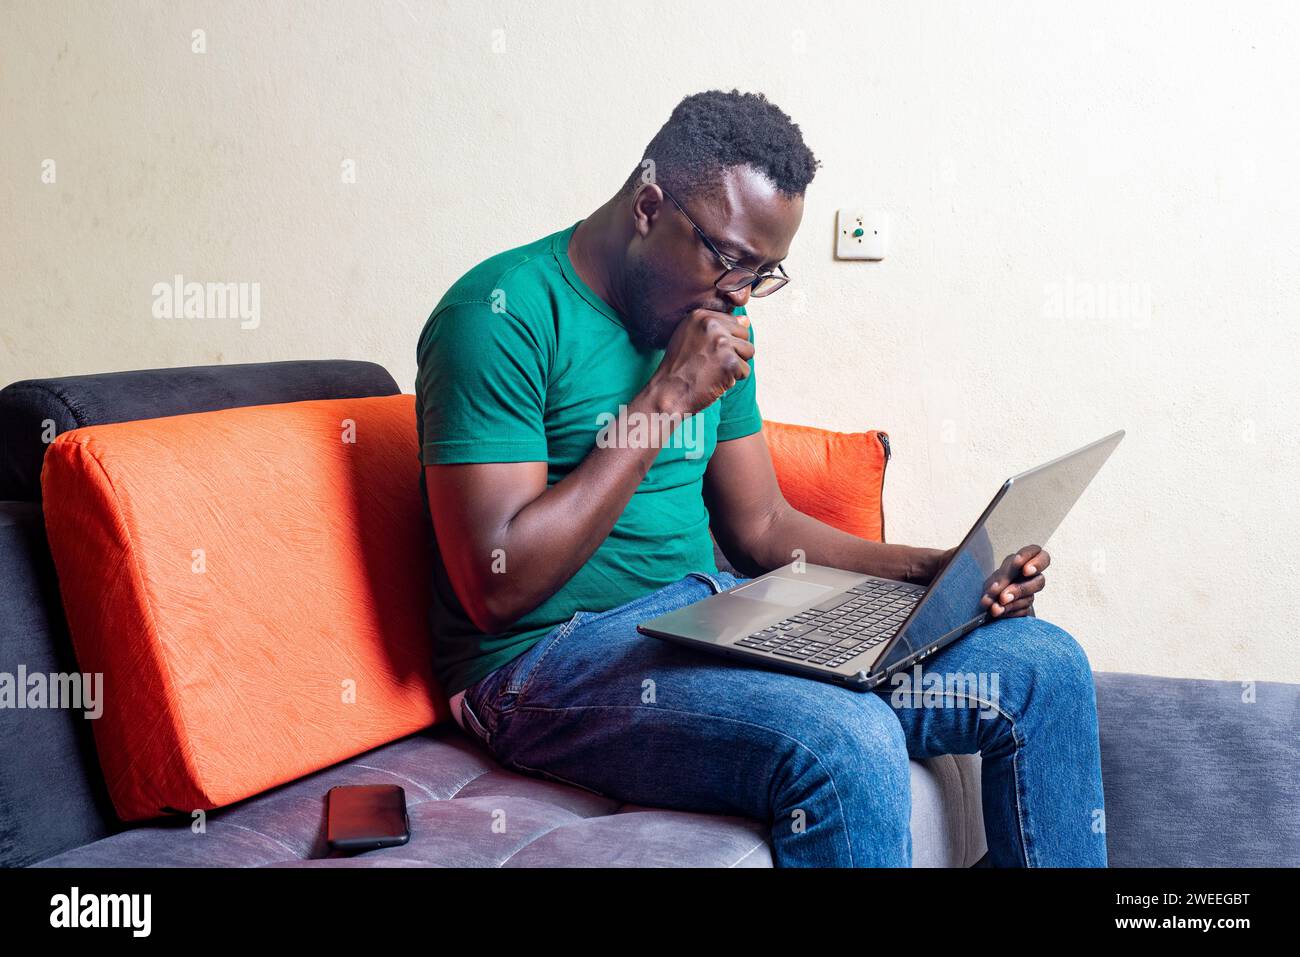 young man in glasses sitting in a sofa home working with laptop covering mouth with fist. Stock Photo